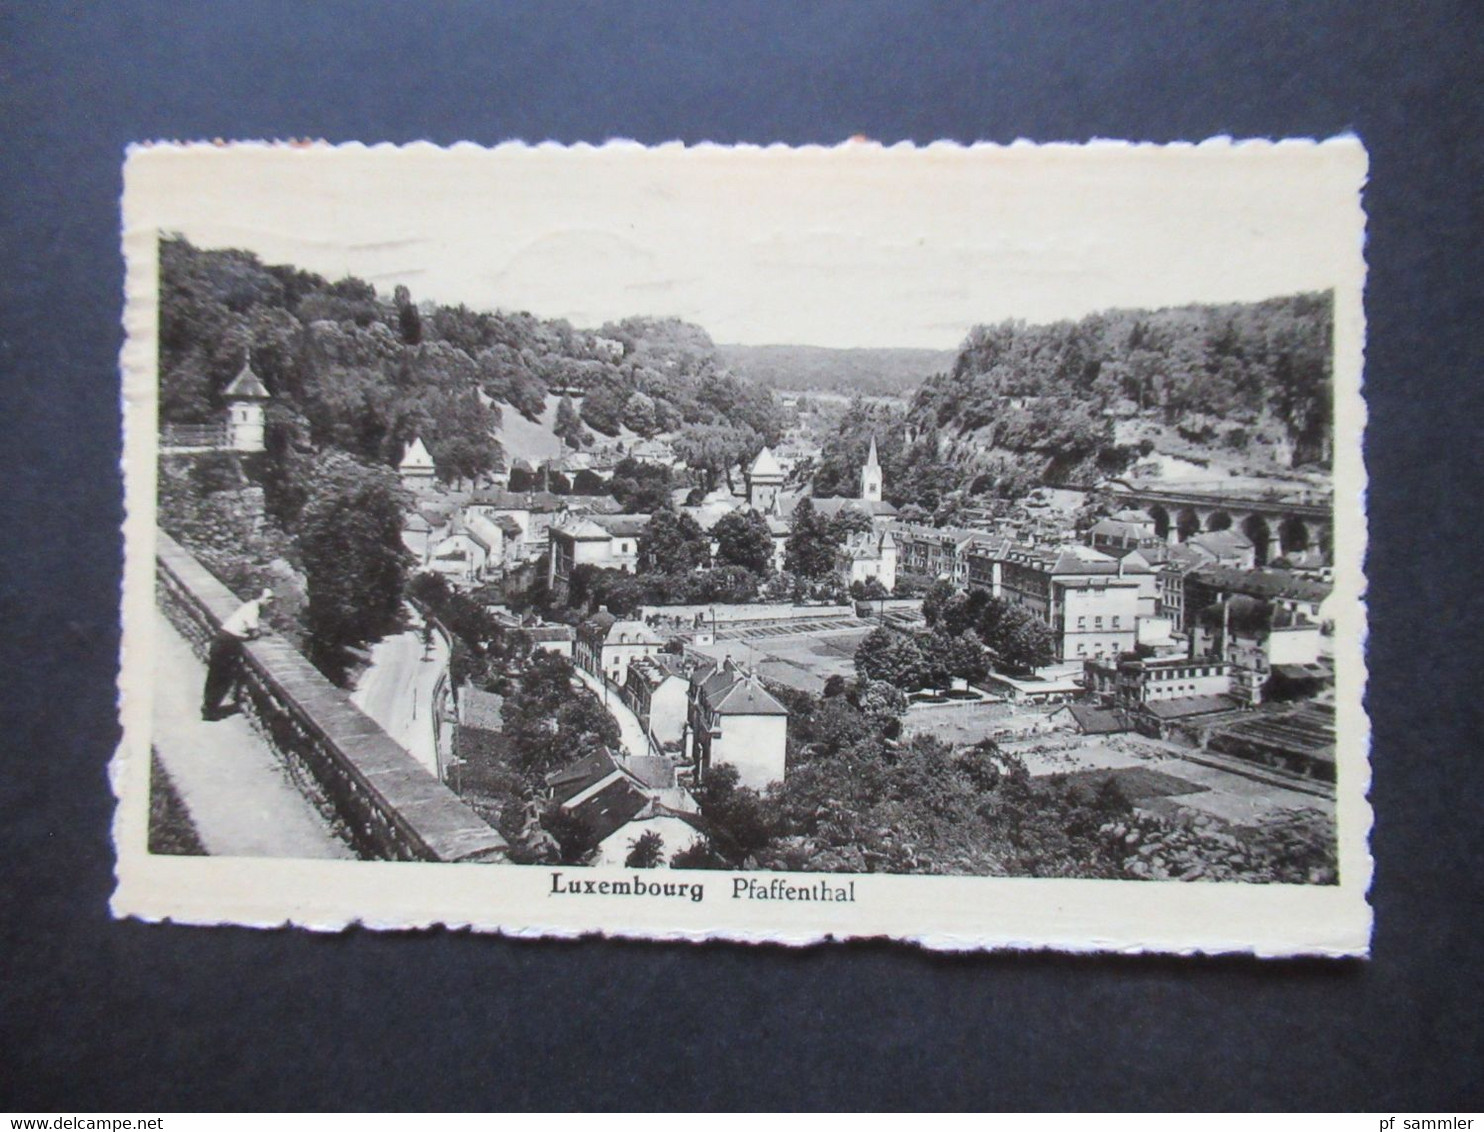 AK 1946 Luxemburg / Luxembourg Pfaffenthal Verlag Messageries Paul Kraus Stempel Loterie Nationale Luxembourgeoise - Luxembourg - Ville